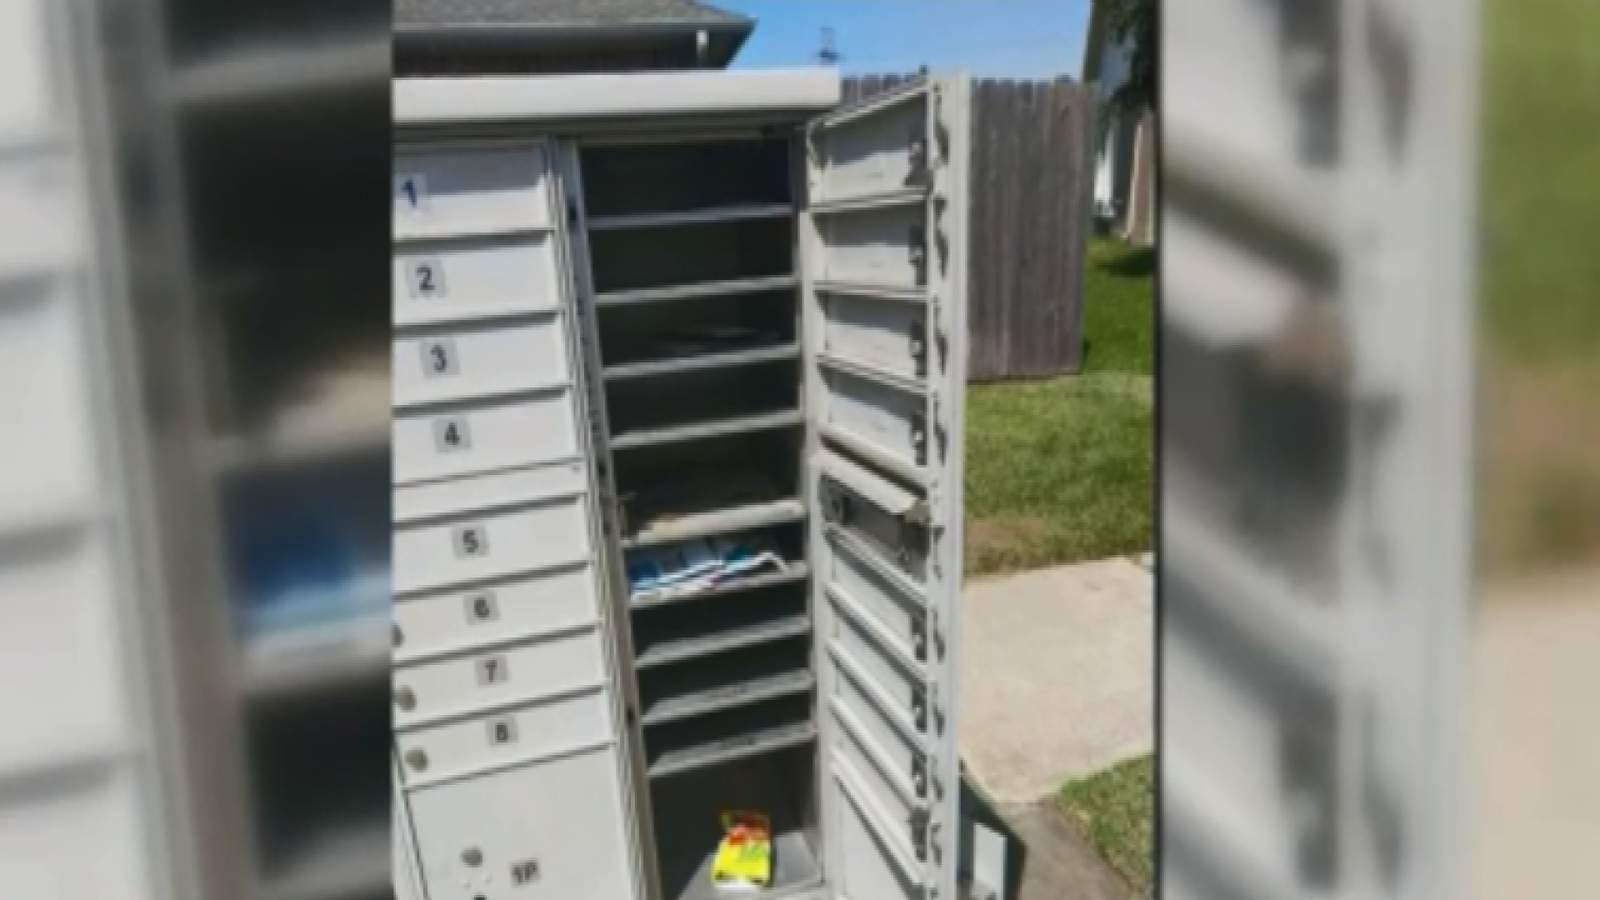 Inspectors on the hunt for thief targeting northwest Harris County residents' mail